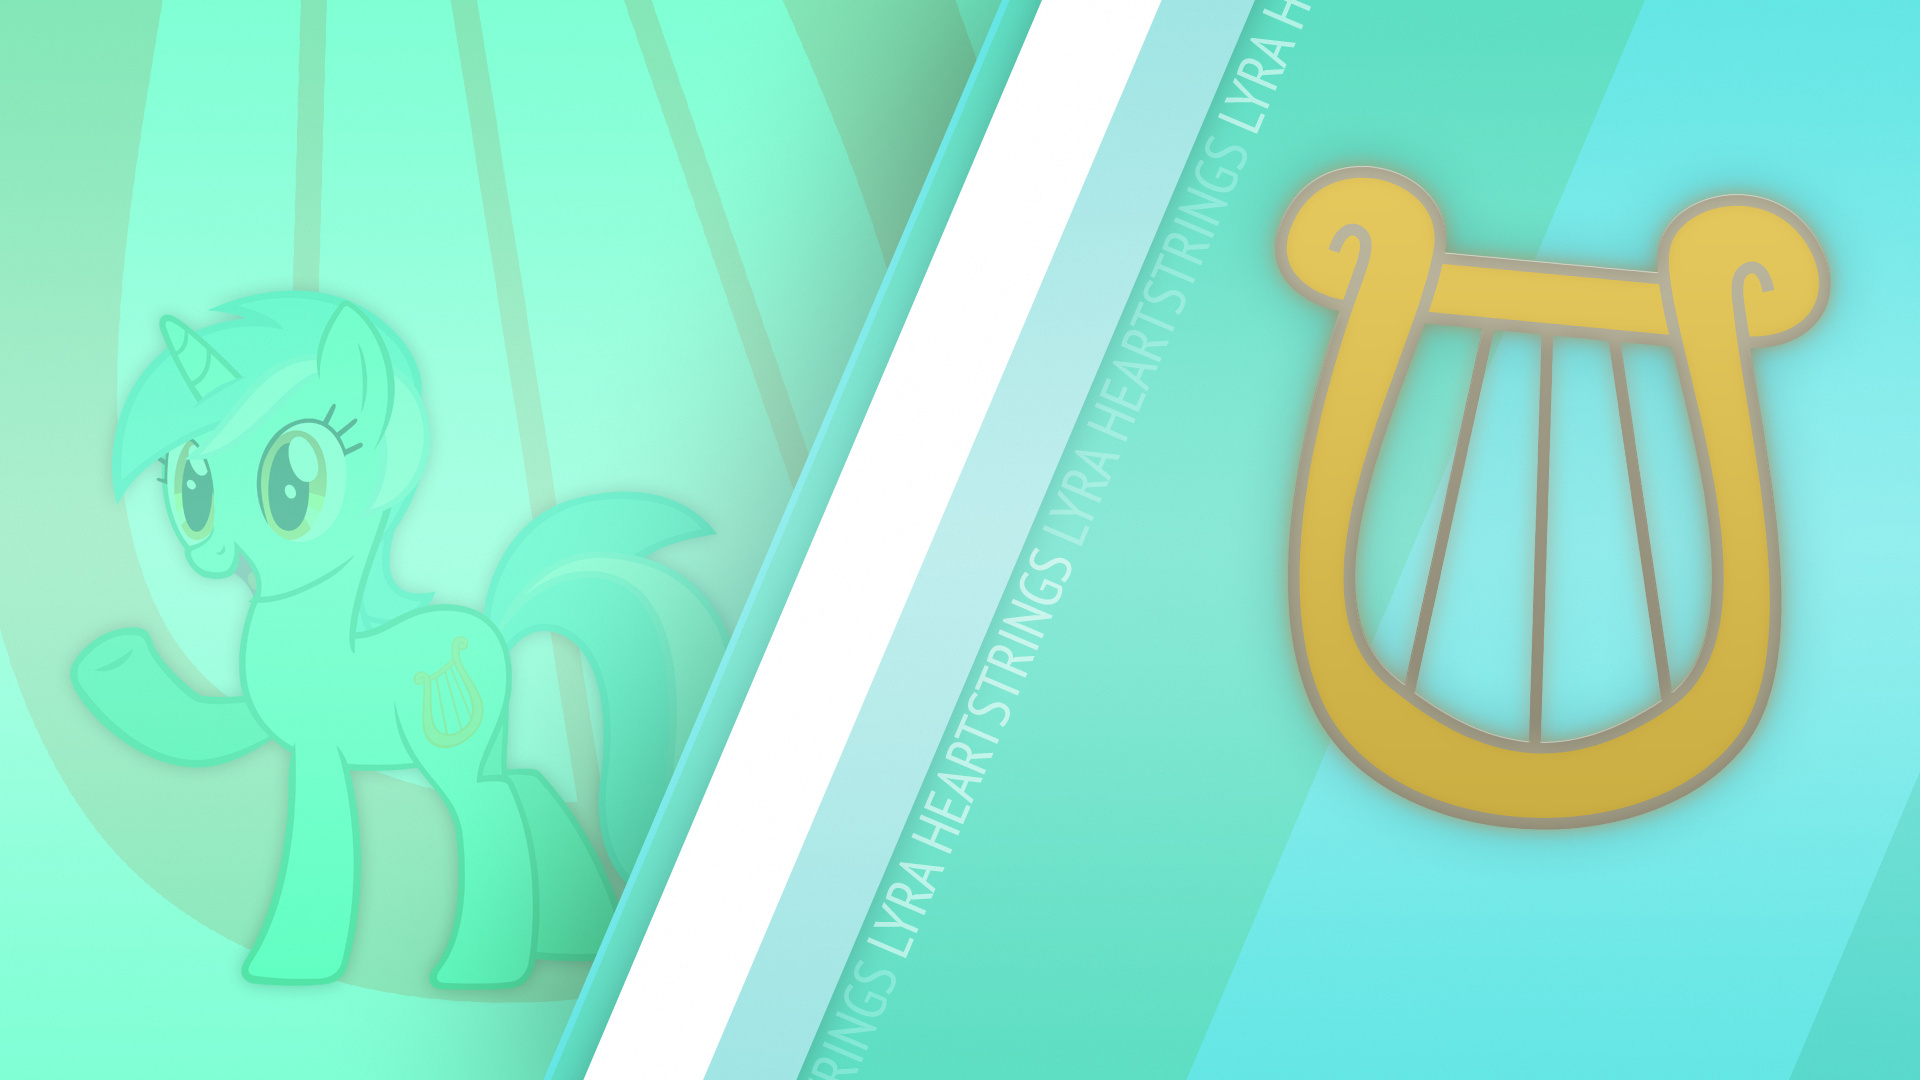 Lyra CM Wallpaper by Bardiel83, MisterLolrus and The-Smiling-Pony